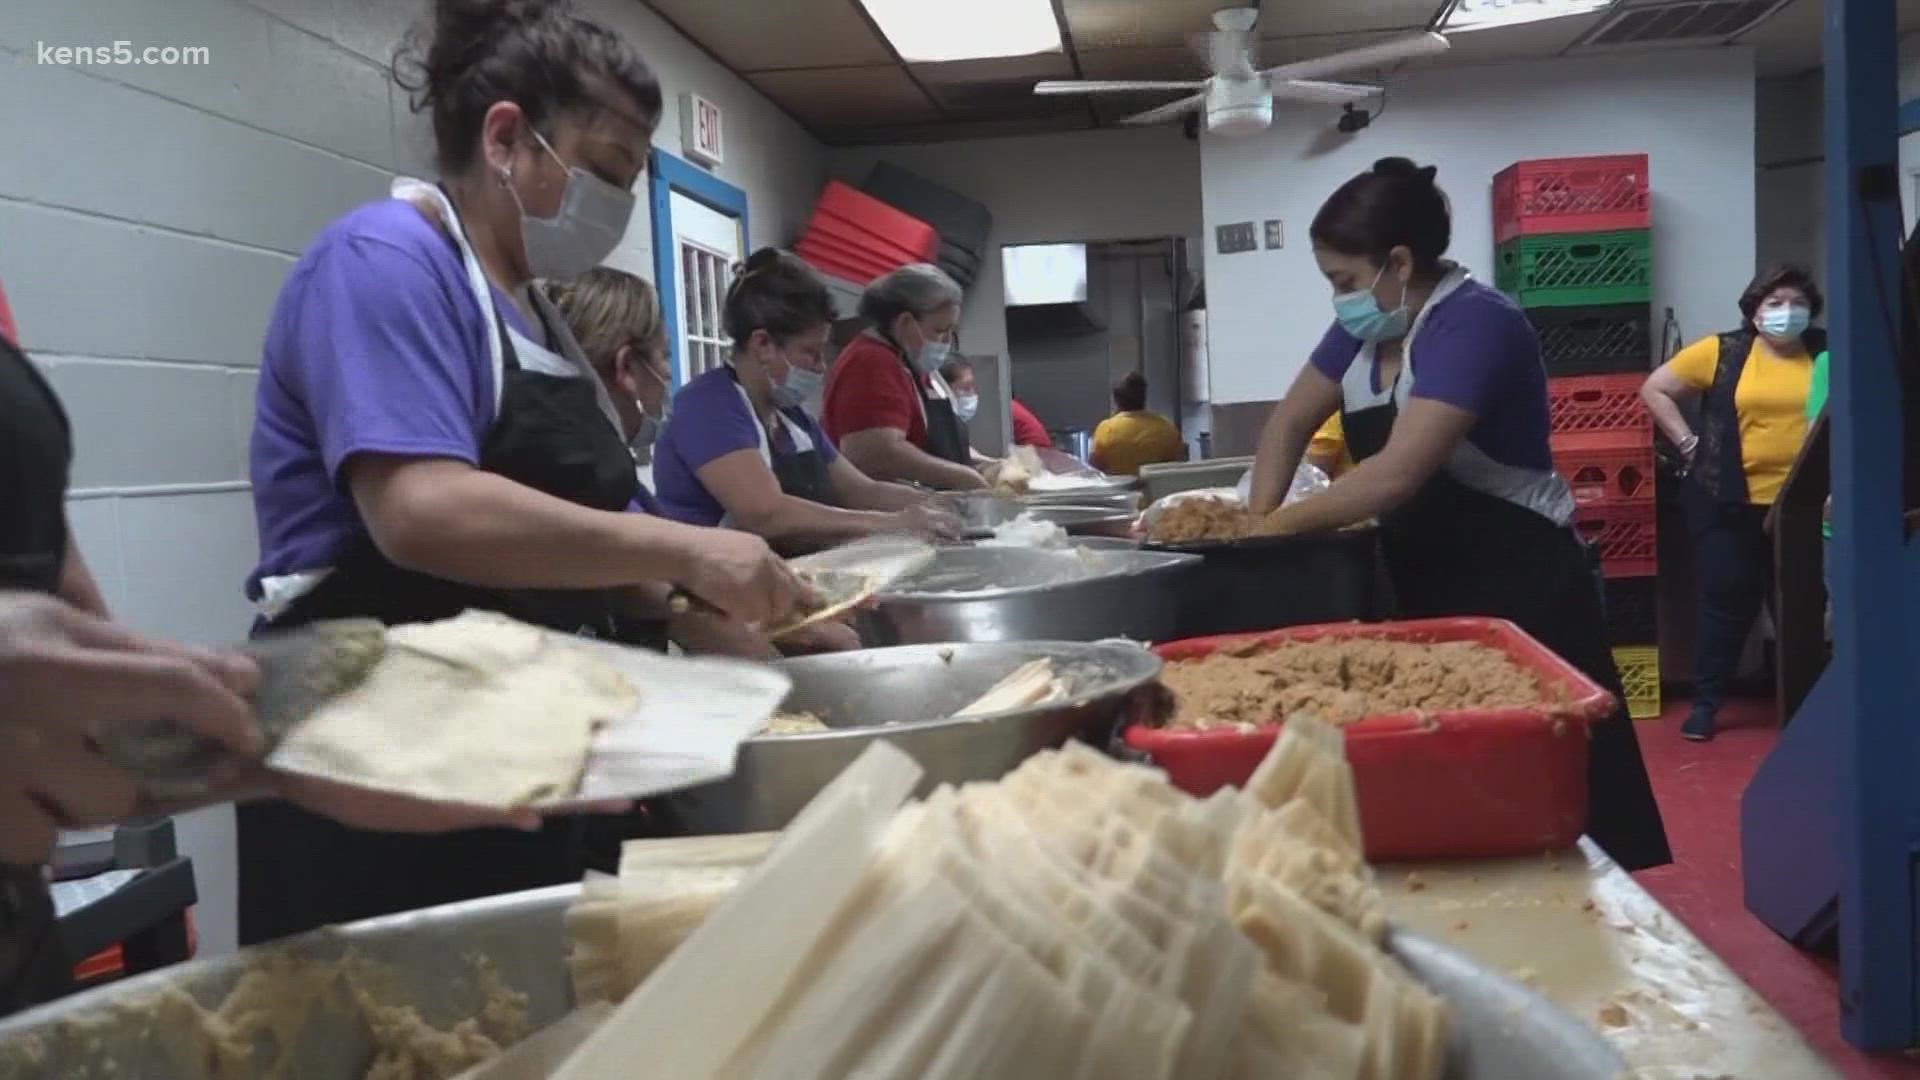 "The art of making by hand is diminishing," said Rosalinda Perez, the manager of Ruben's Tamales.